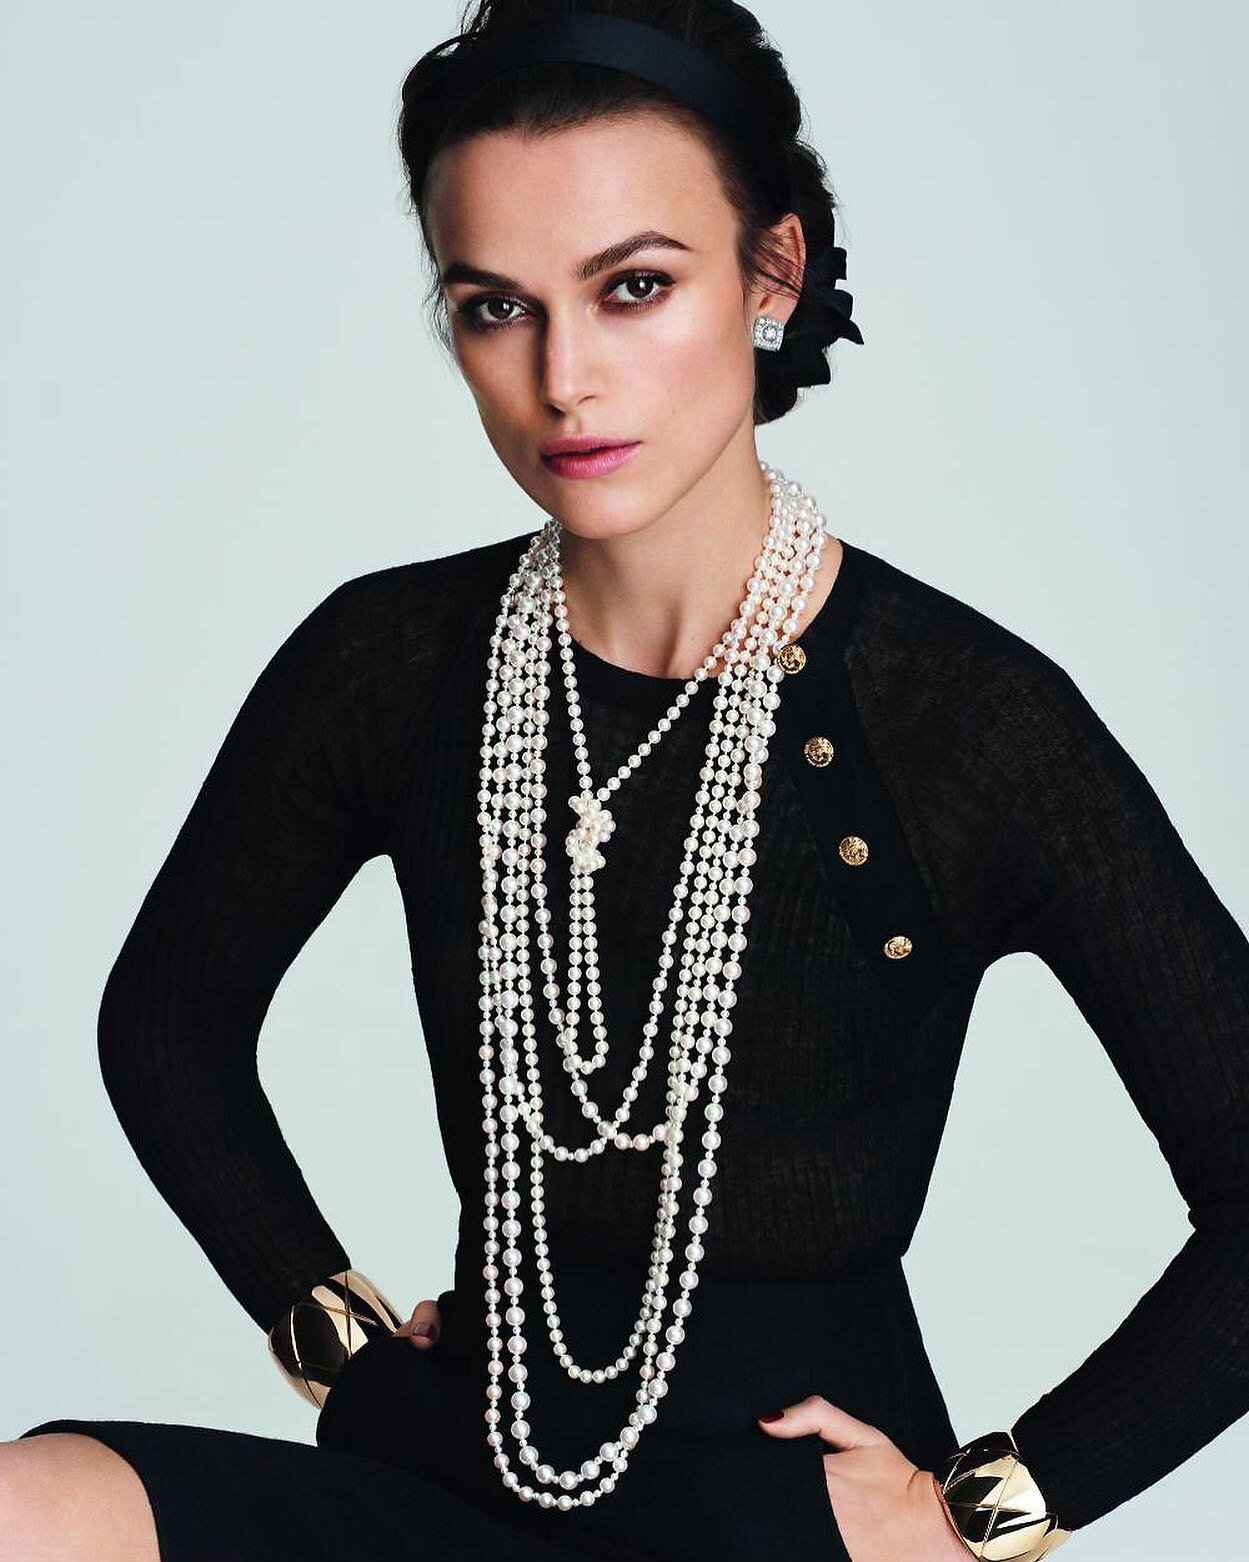 Pearls are classic and not just for Christmas but make beautiful gifts - visit our website or shop to find the perfect present

Image credit: Keira Knightley